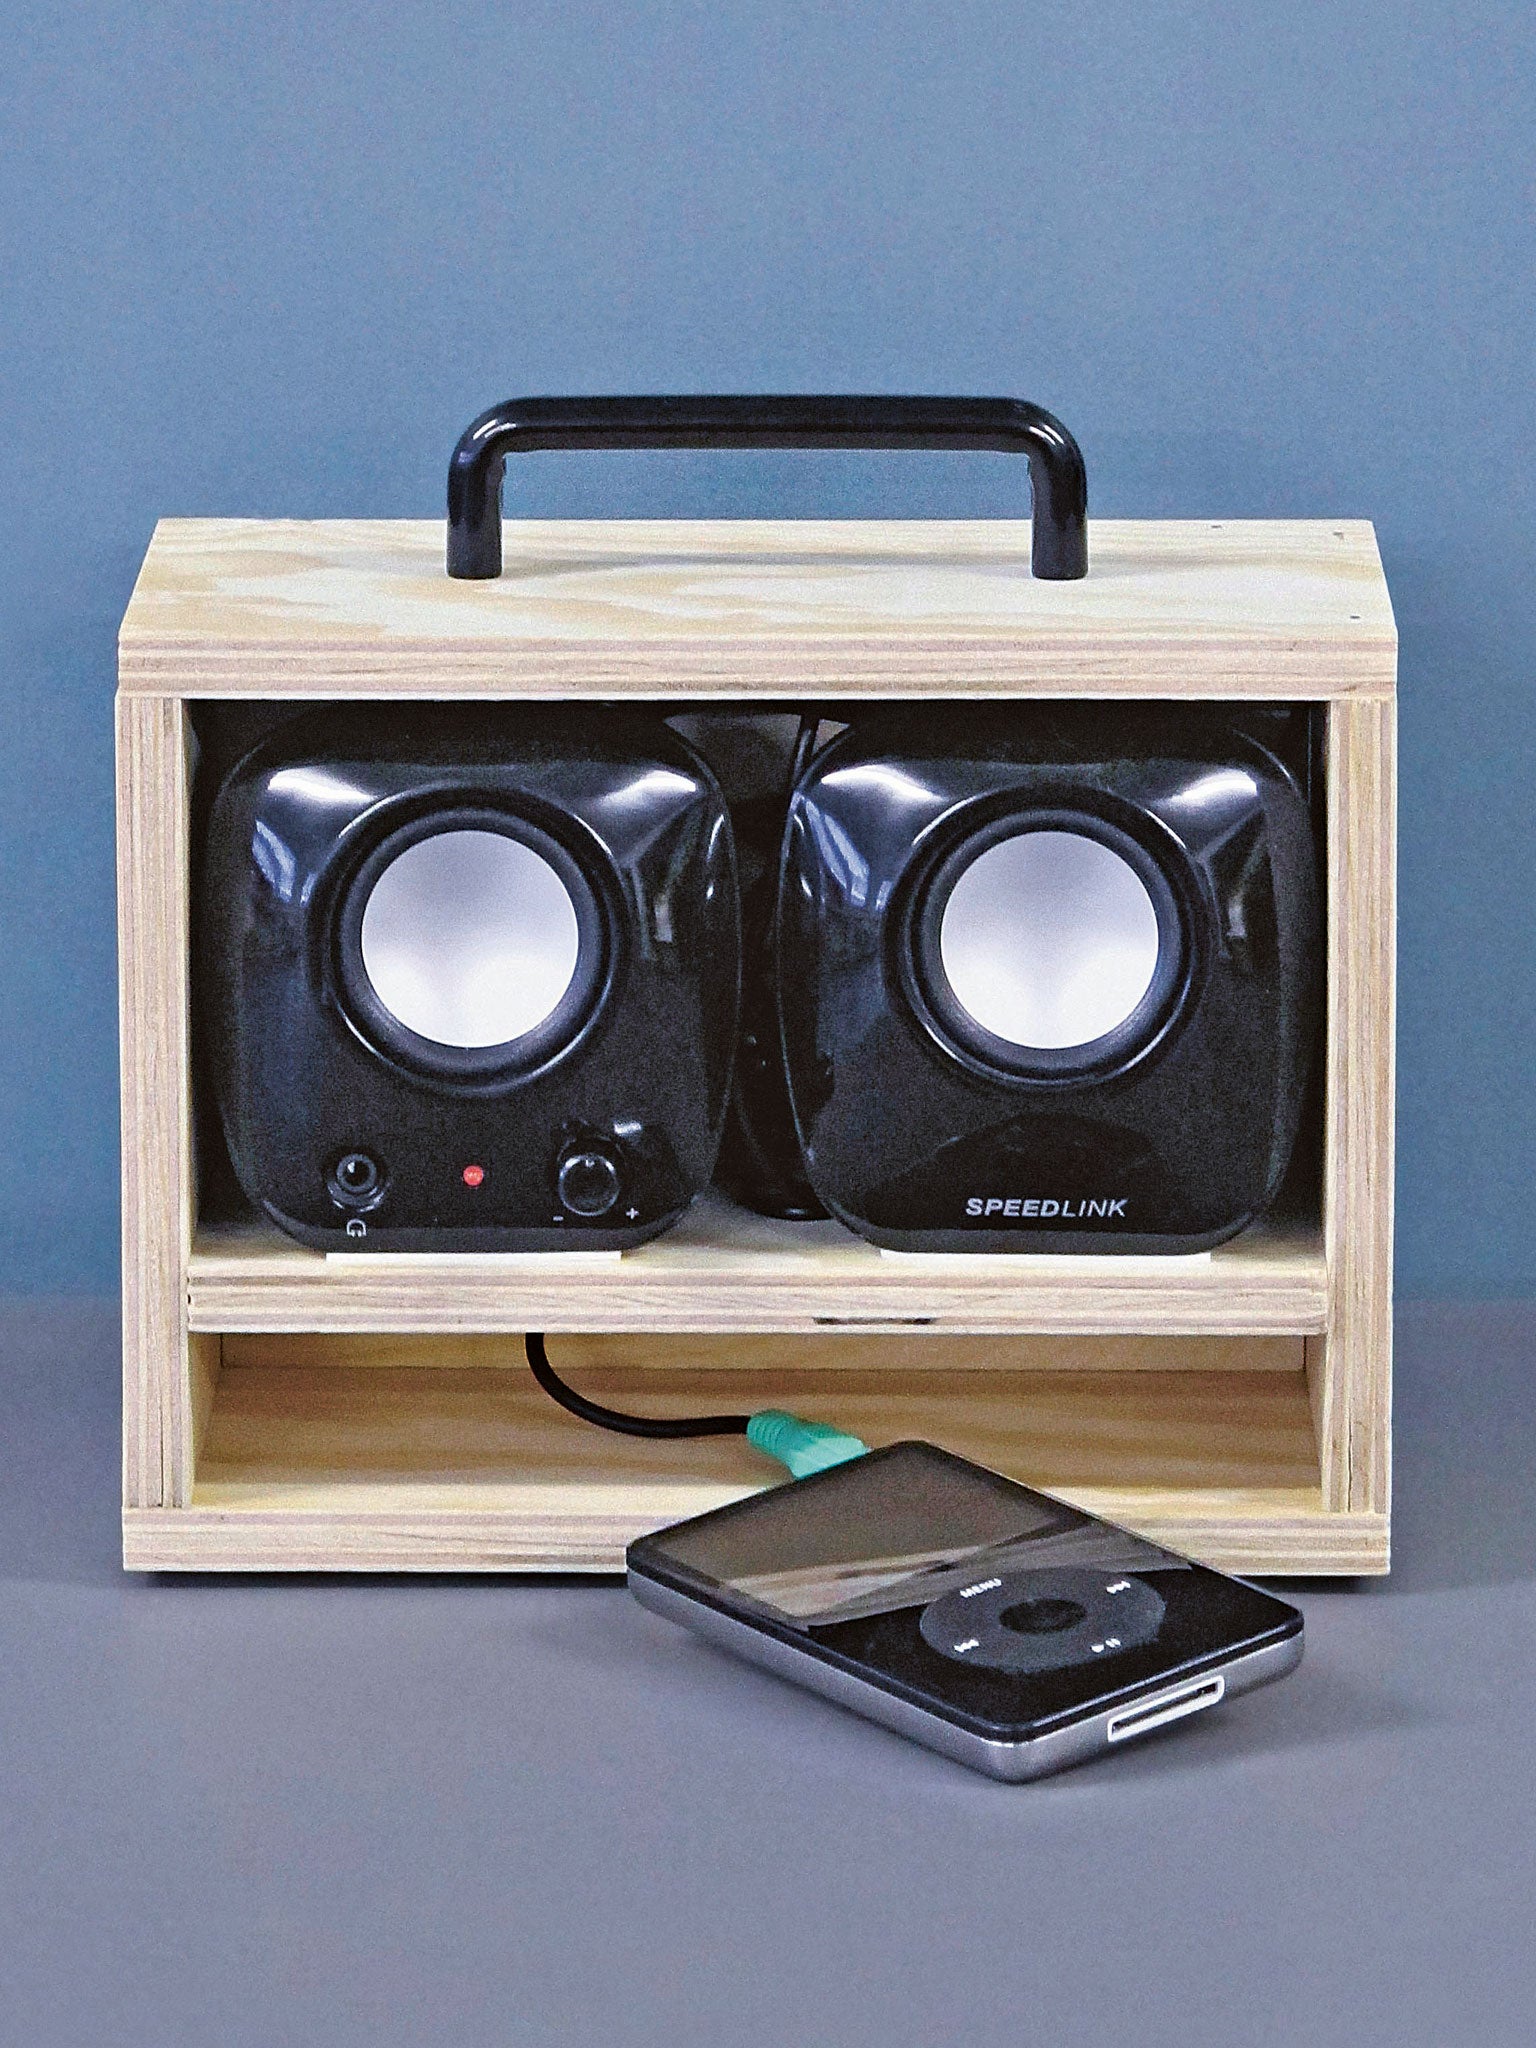 Boombox: Konstantin Grcic 'wanted to produce something raw and cobbled together that would contrast with this polished world of gadgets'